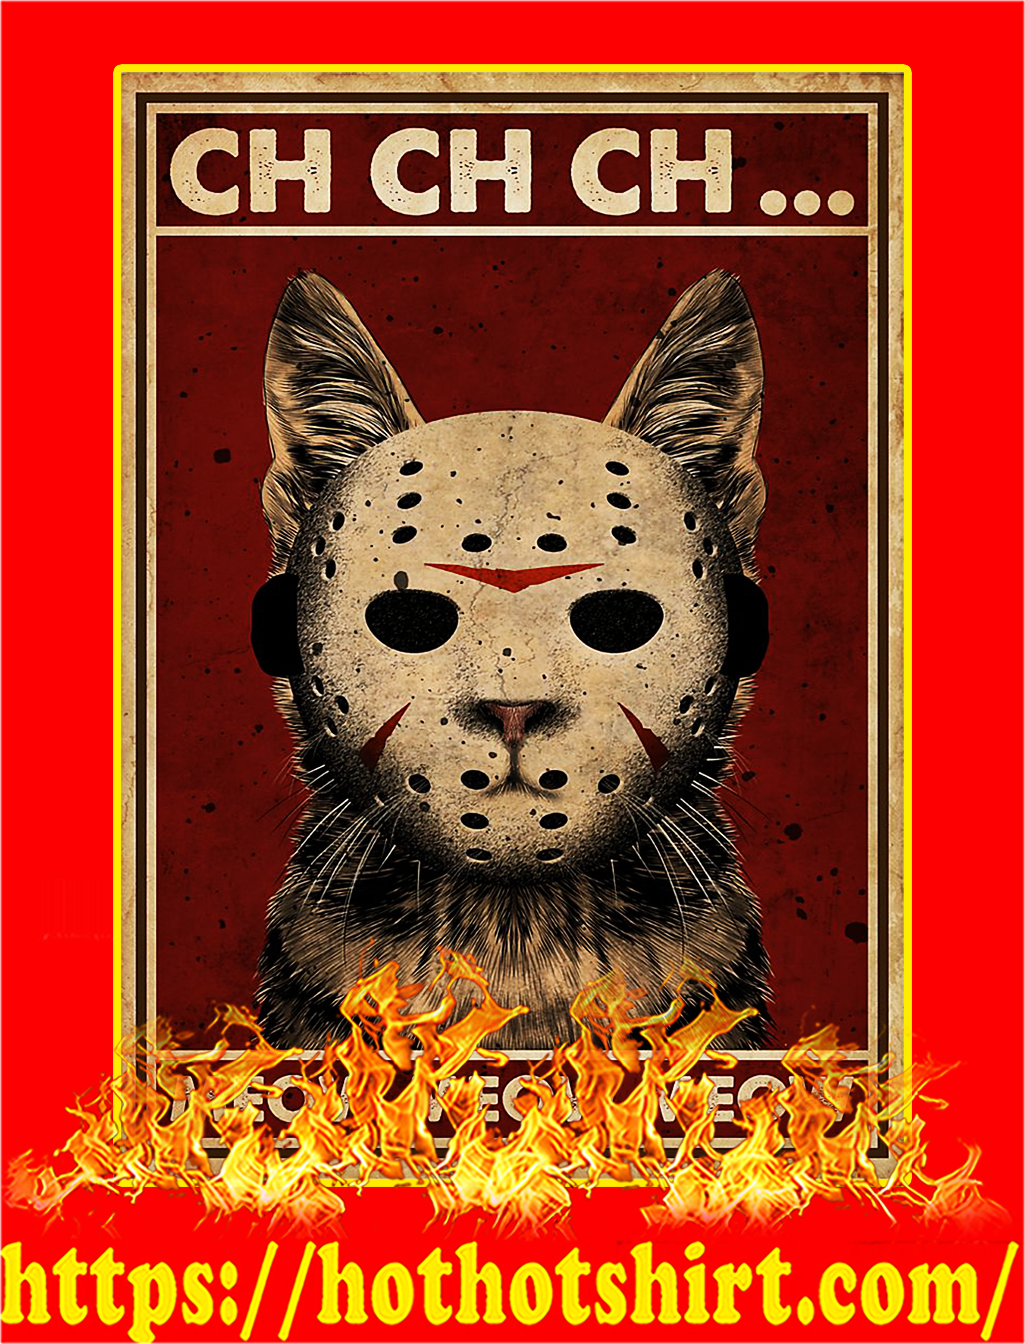 Cat Jason ch ch ch meow meow meow poster